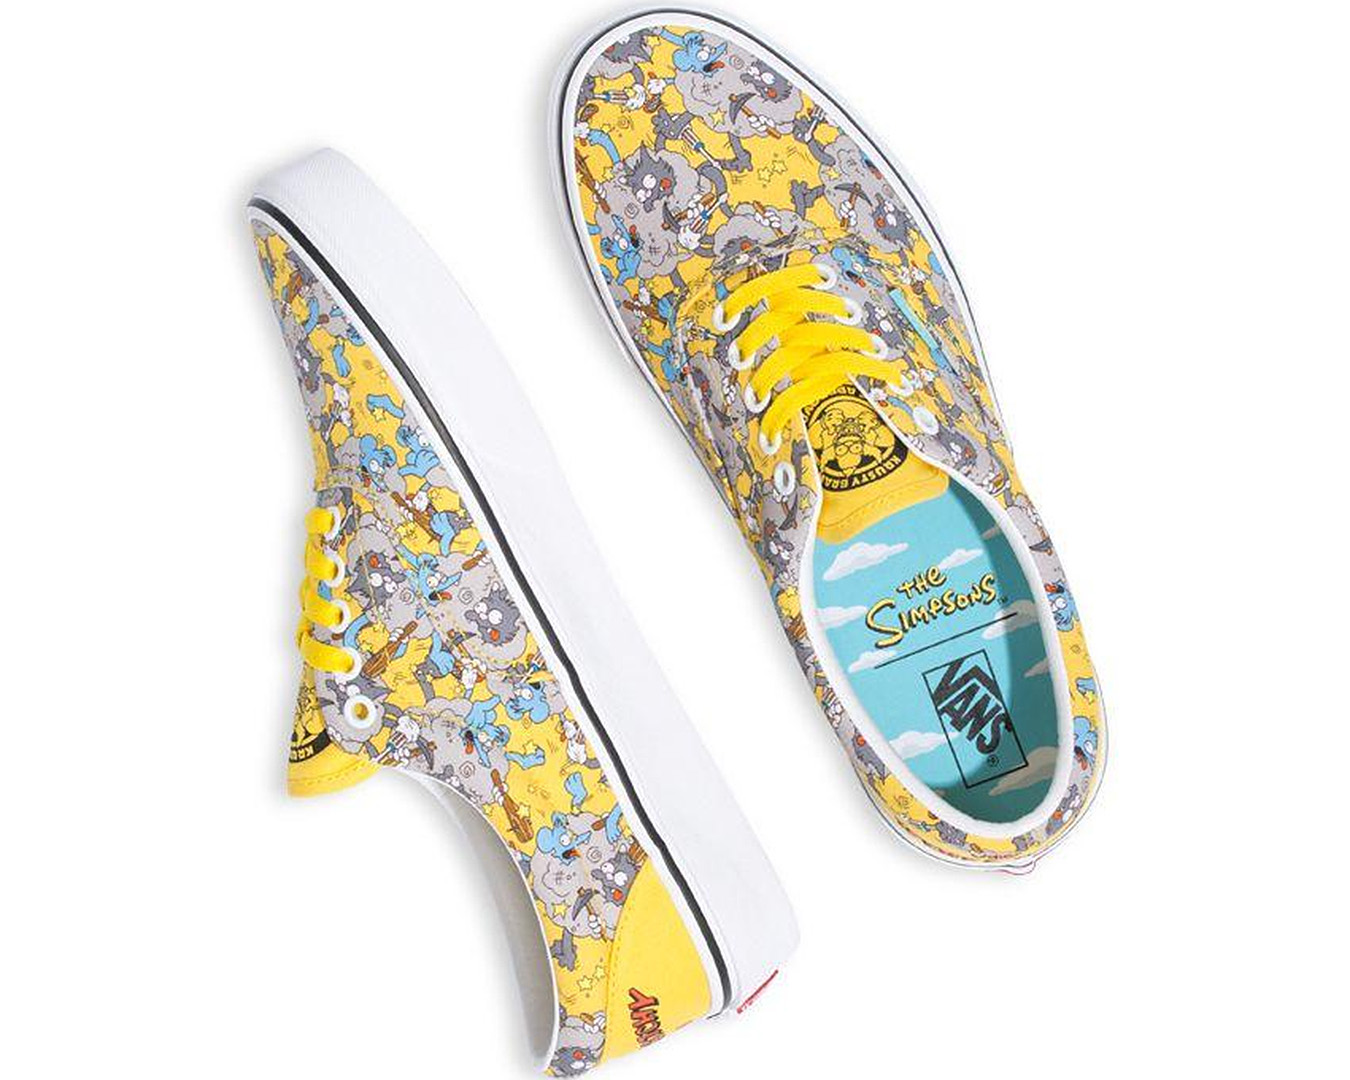 Itchy and Scratchy characters feature on these Vans Era collabs.